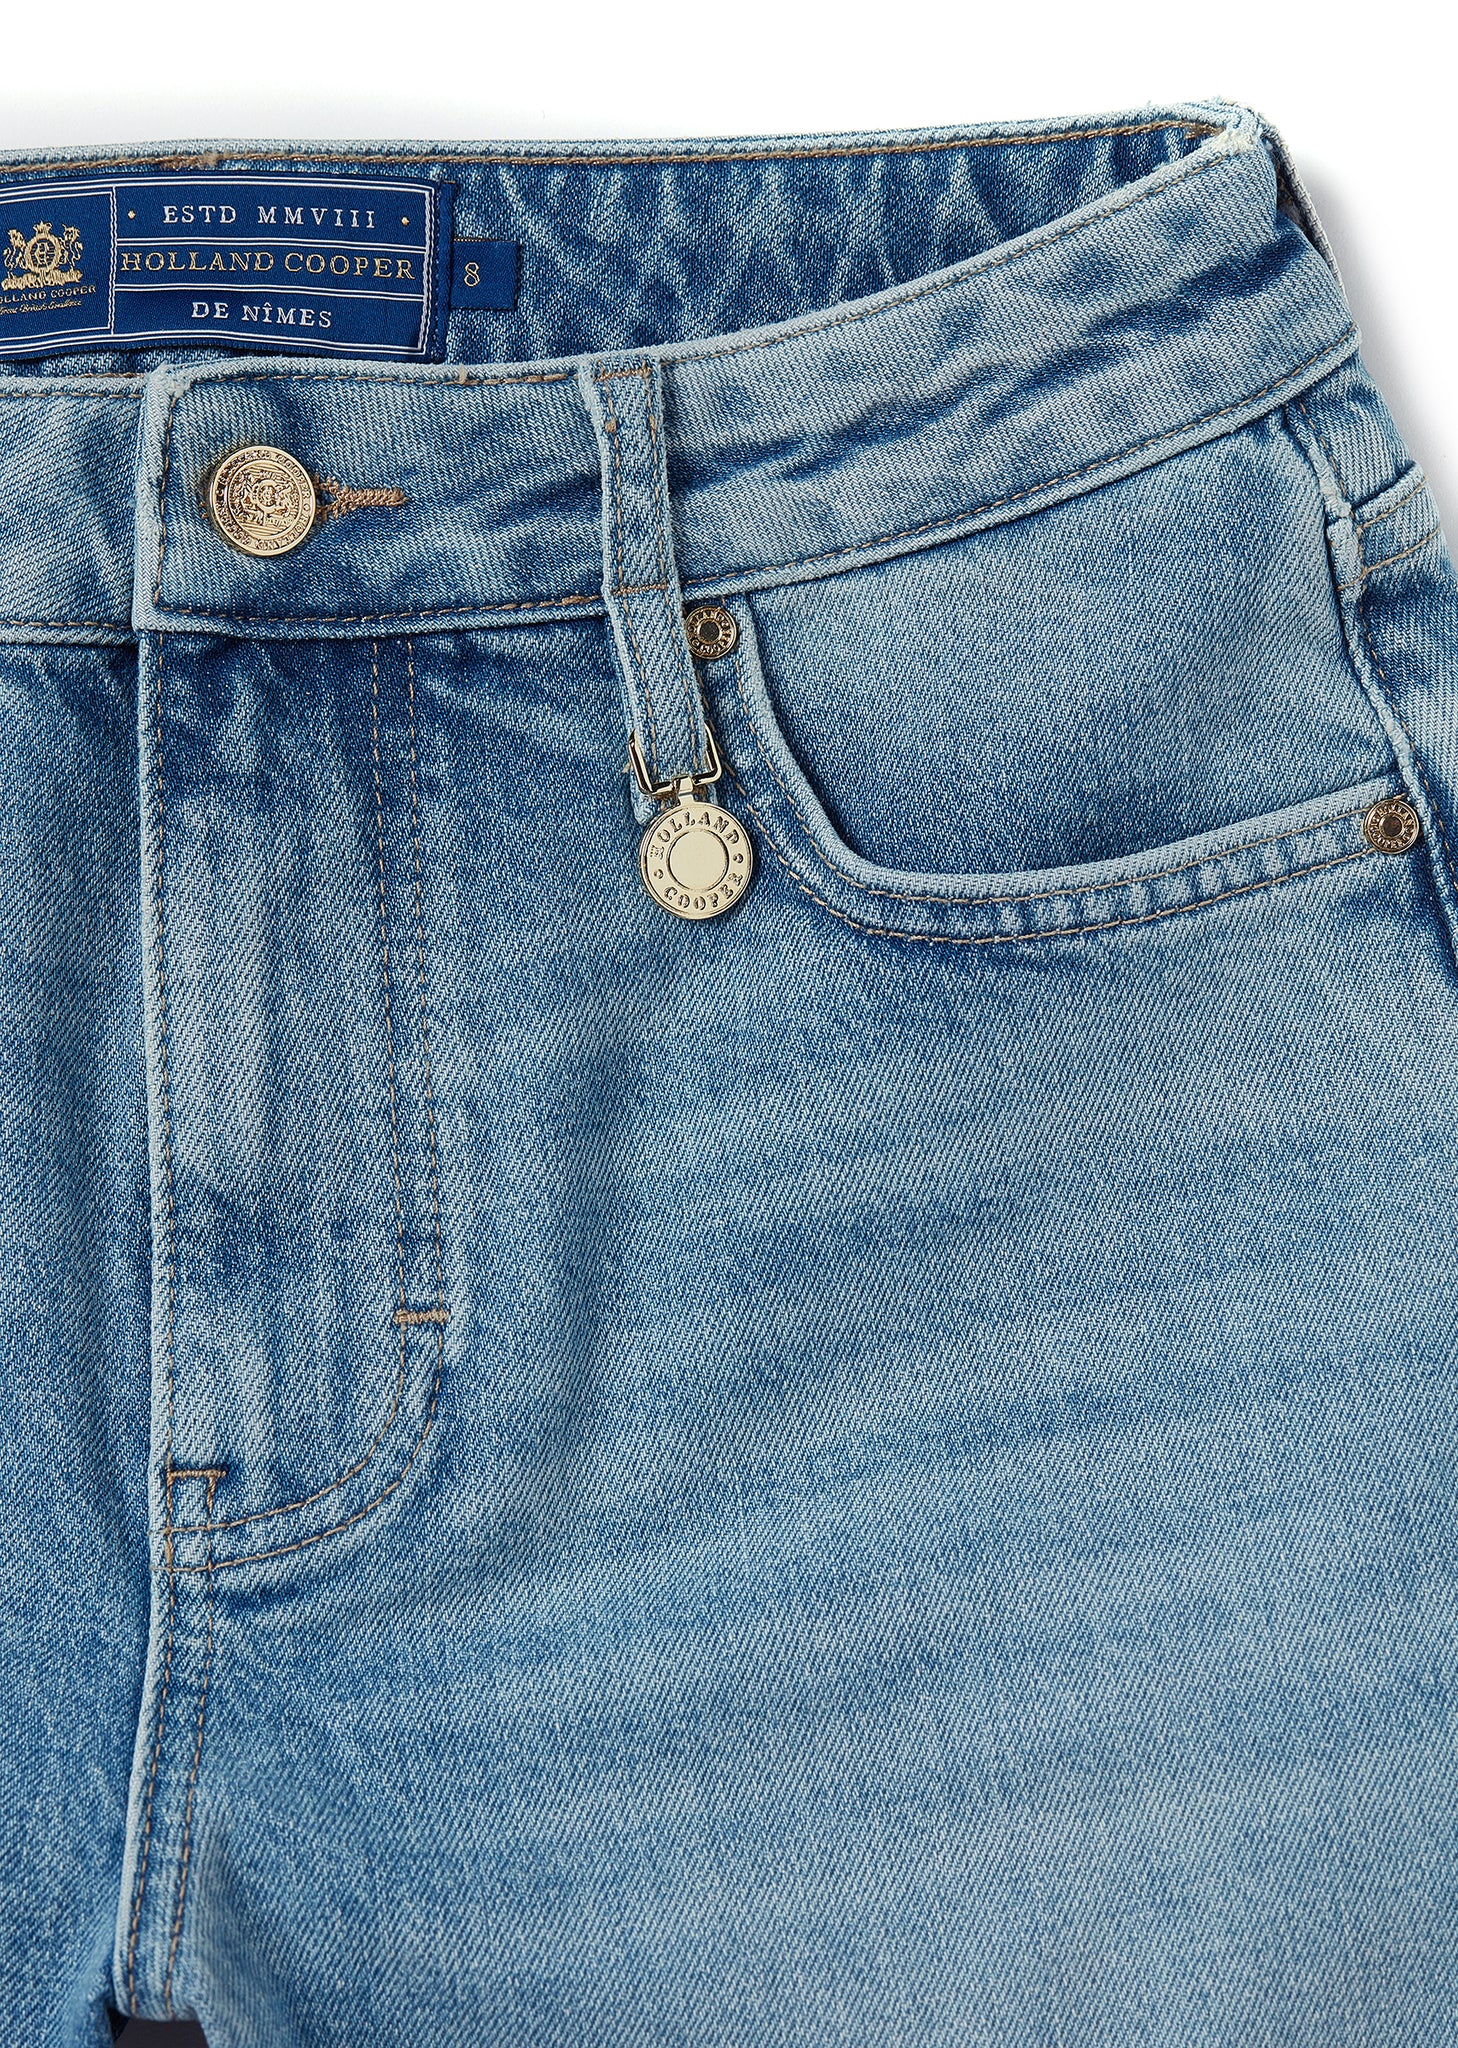 front pocket detail of womens blue denim shorts with raw edge hemline and two open front pockets and two open back pockets with gold hc crest rivet in right front pocket